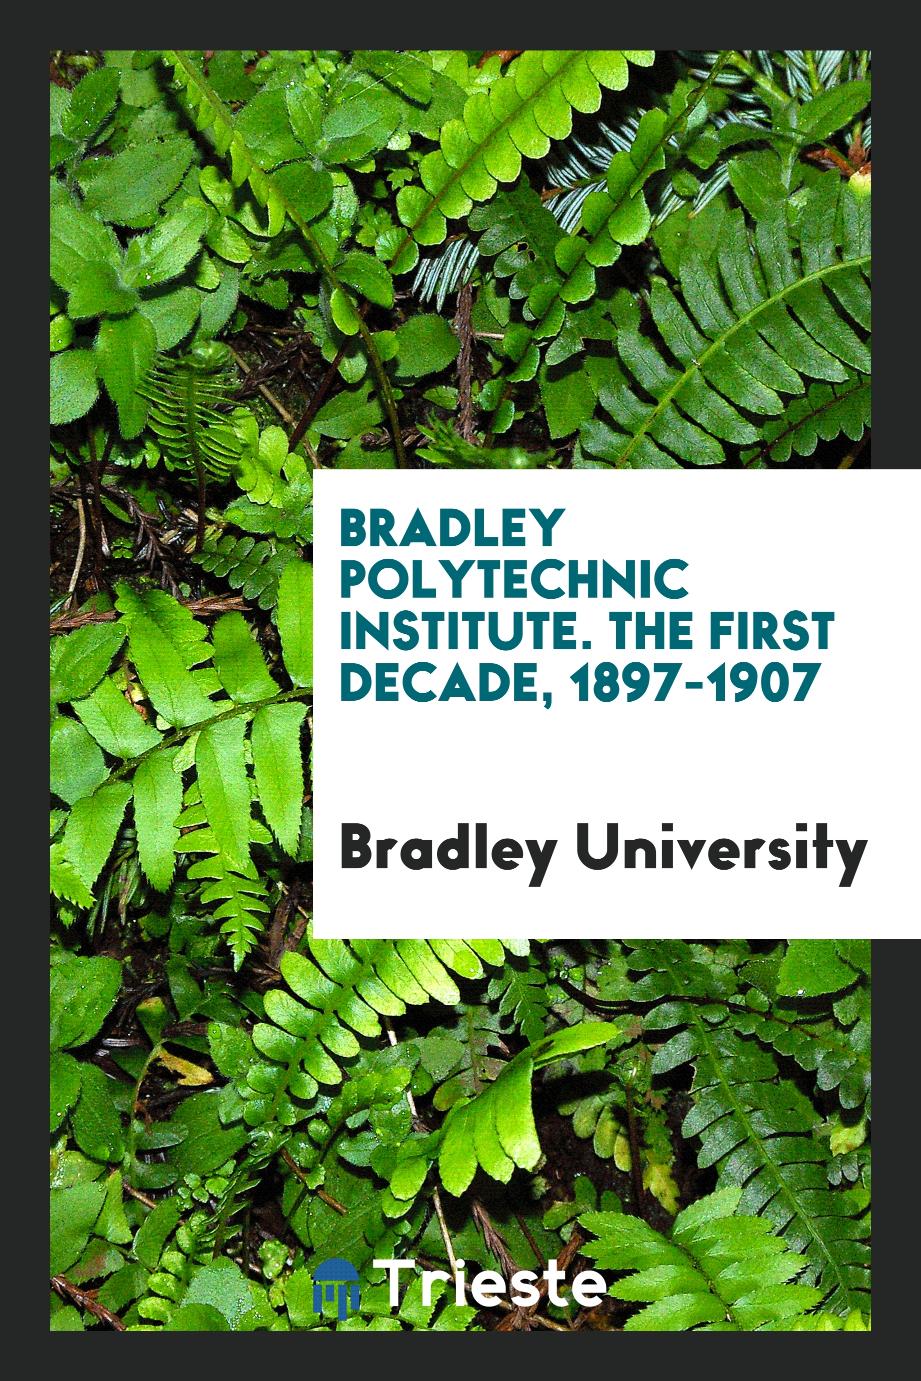 Bradley Polytechnic Institute. The first decade, 1897-1907